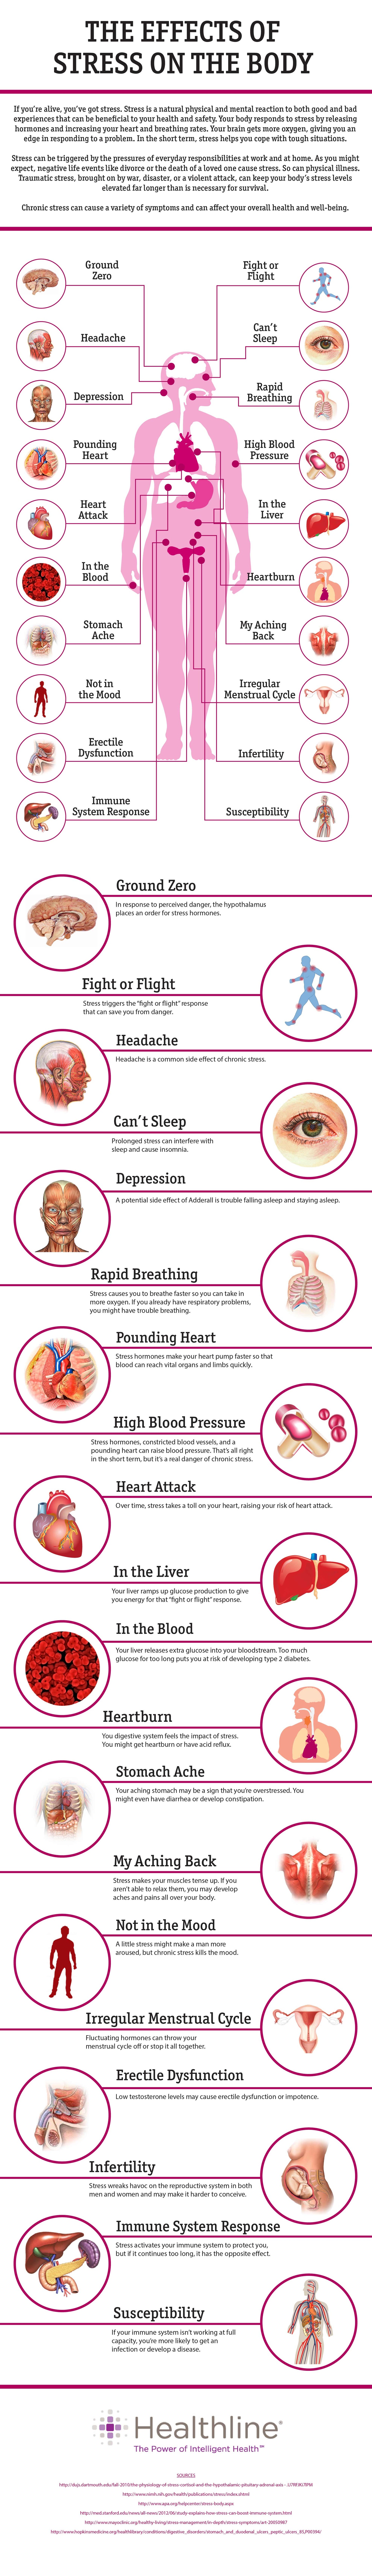 The Effects of Stress on the Body